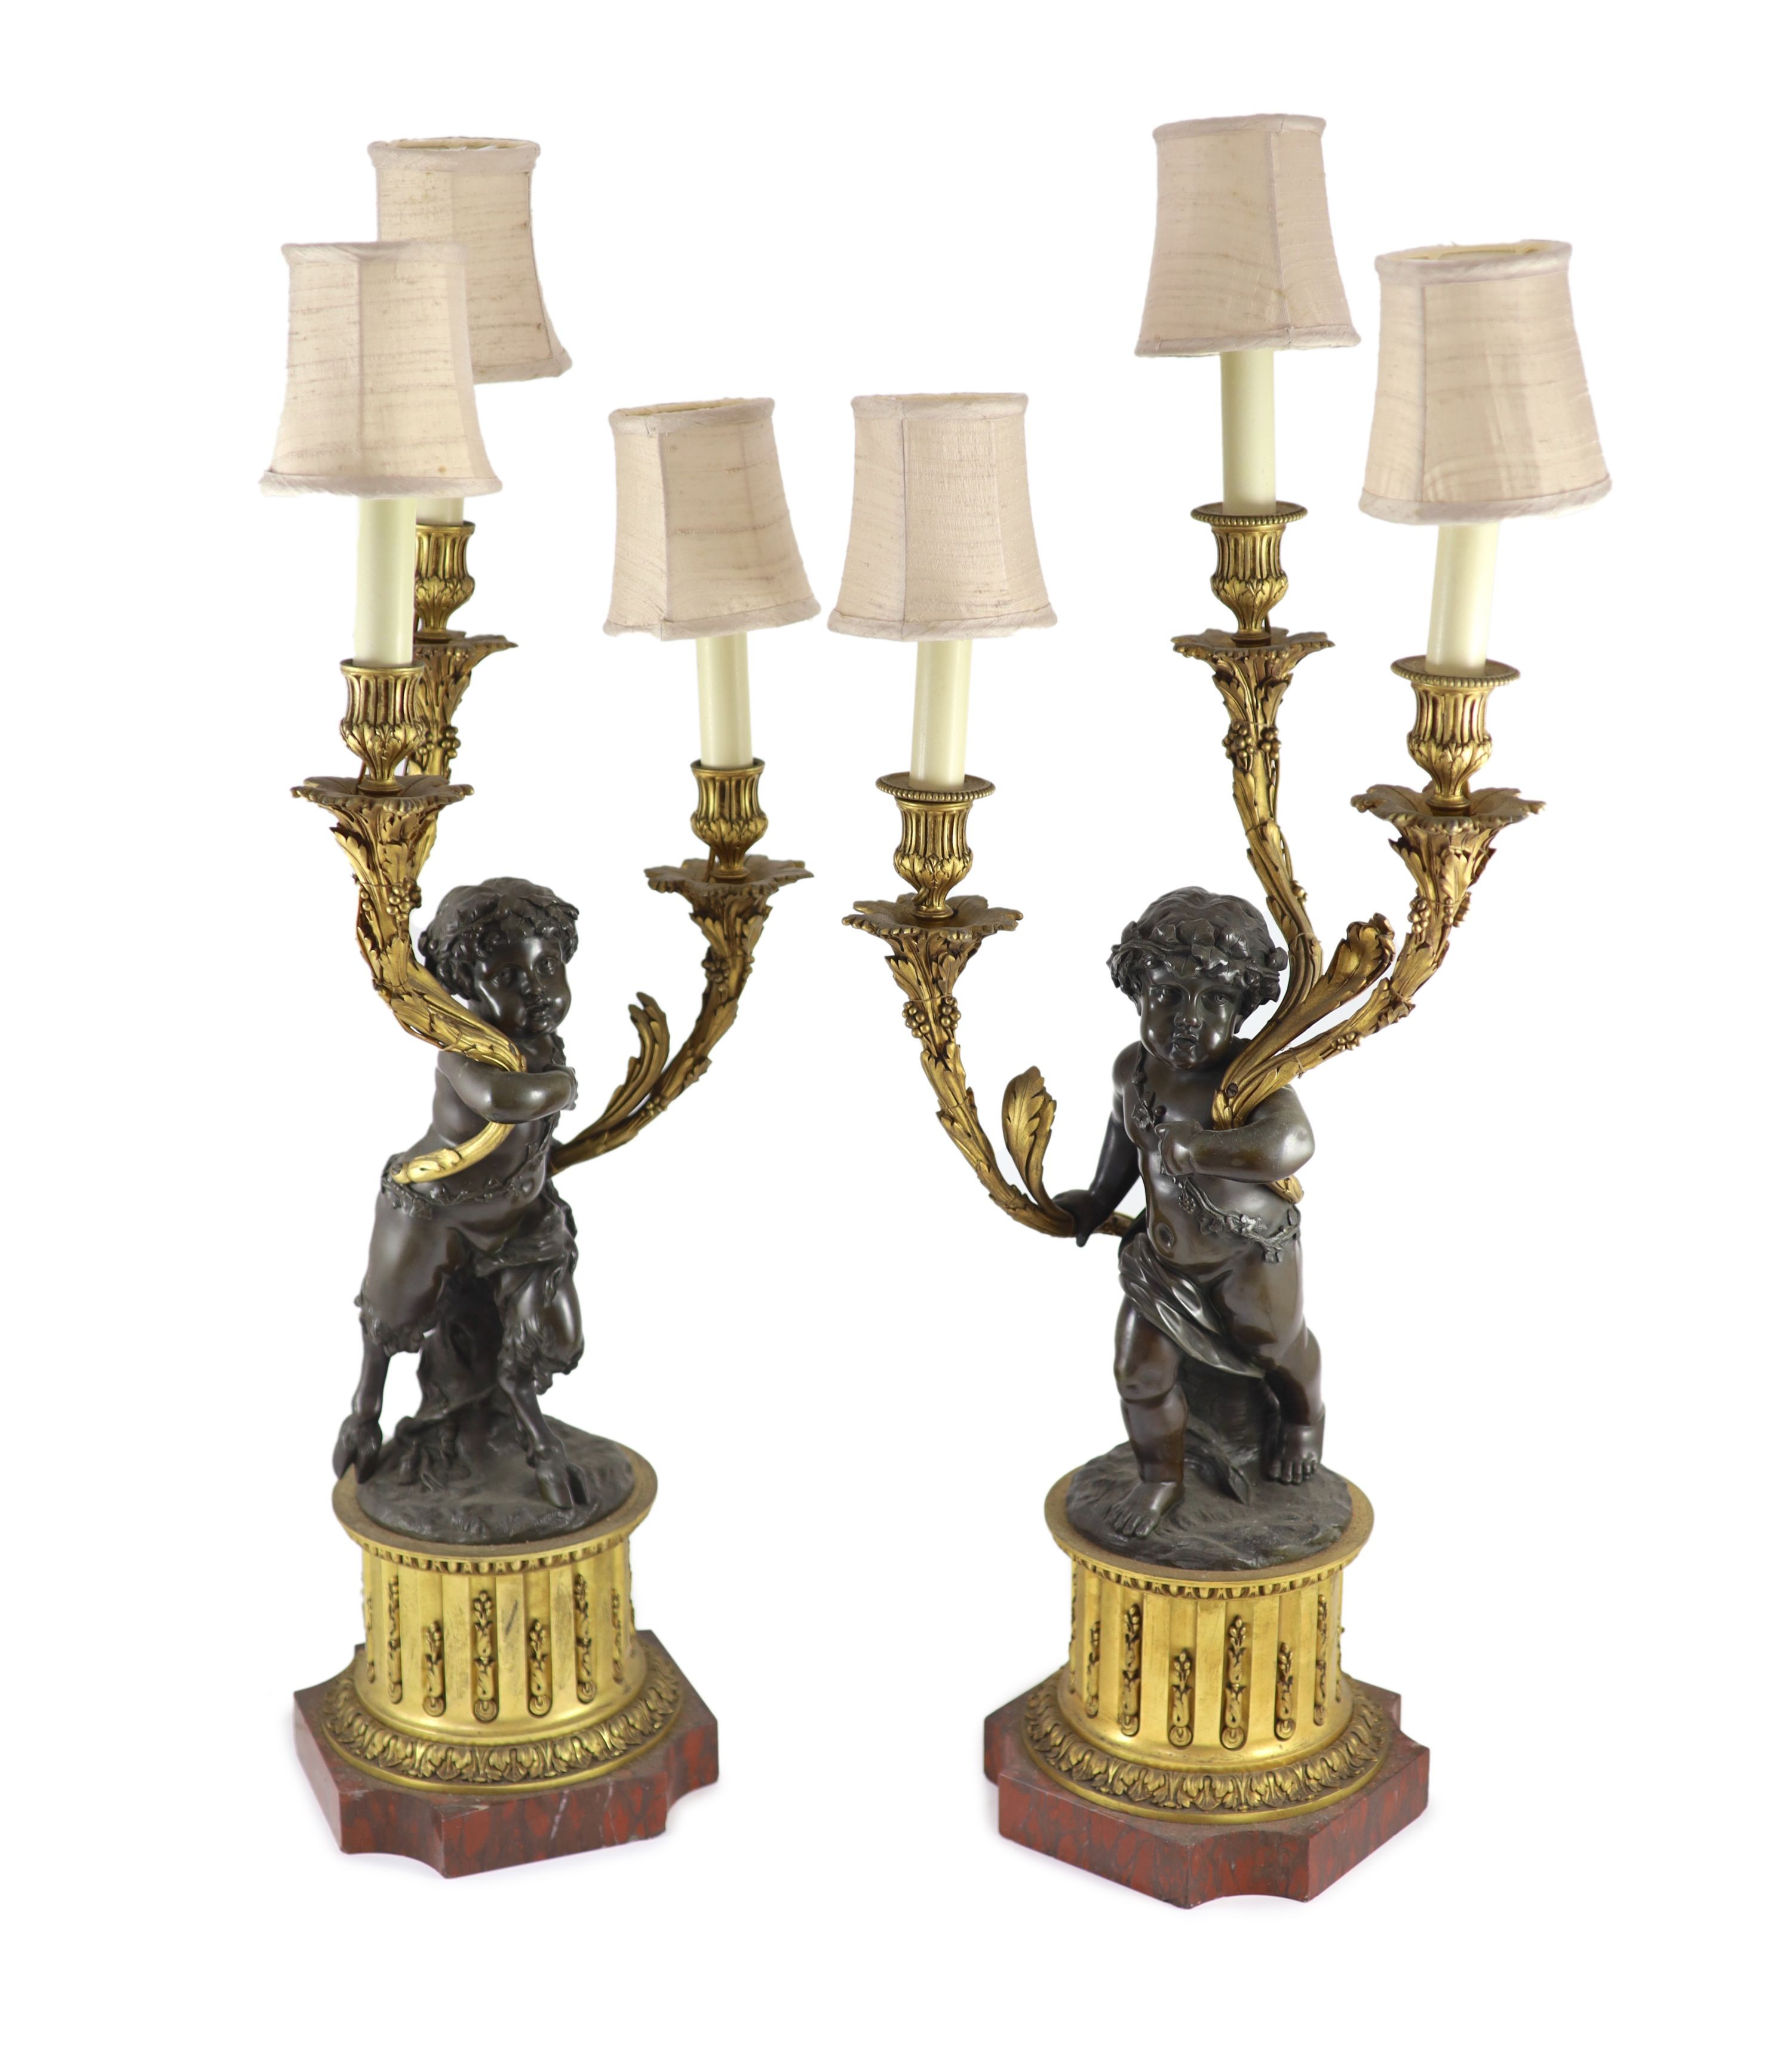 A pair of 19th century French bronze and ormolu three light candelabra, after Clodion height 66cm                                                                                                                           